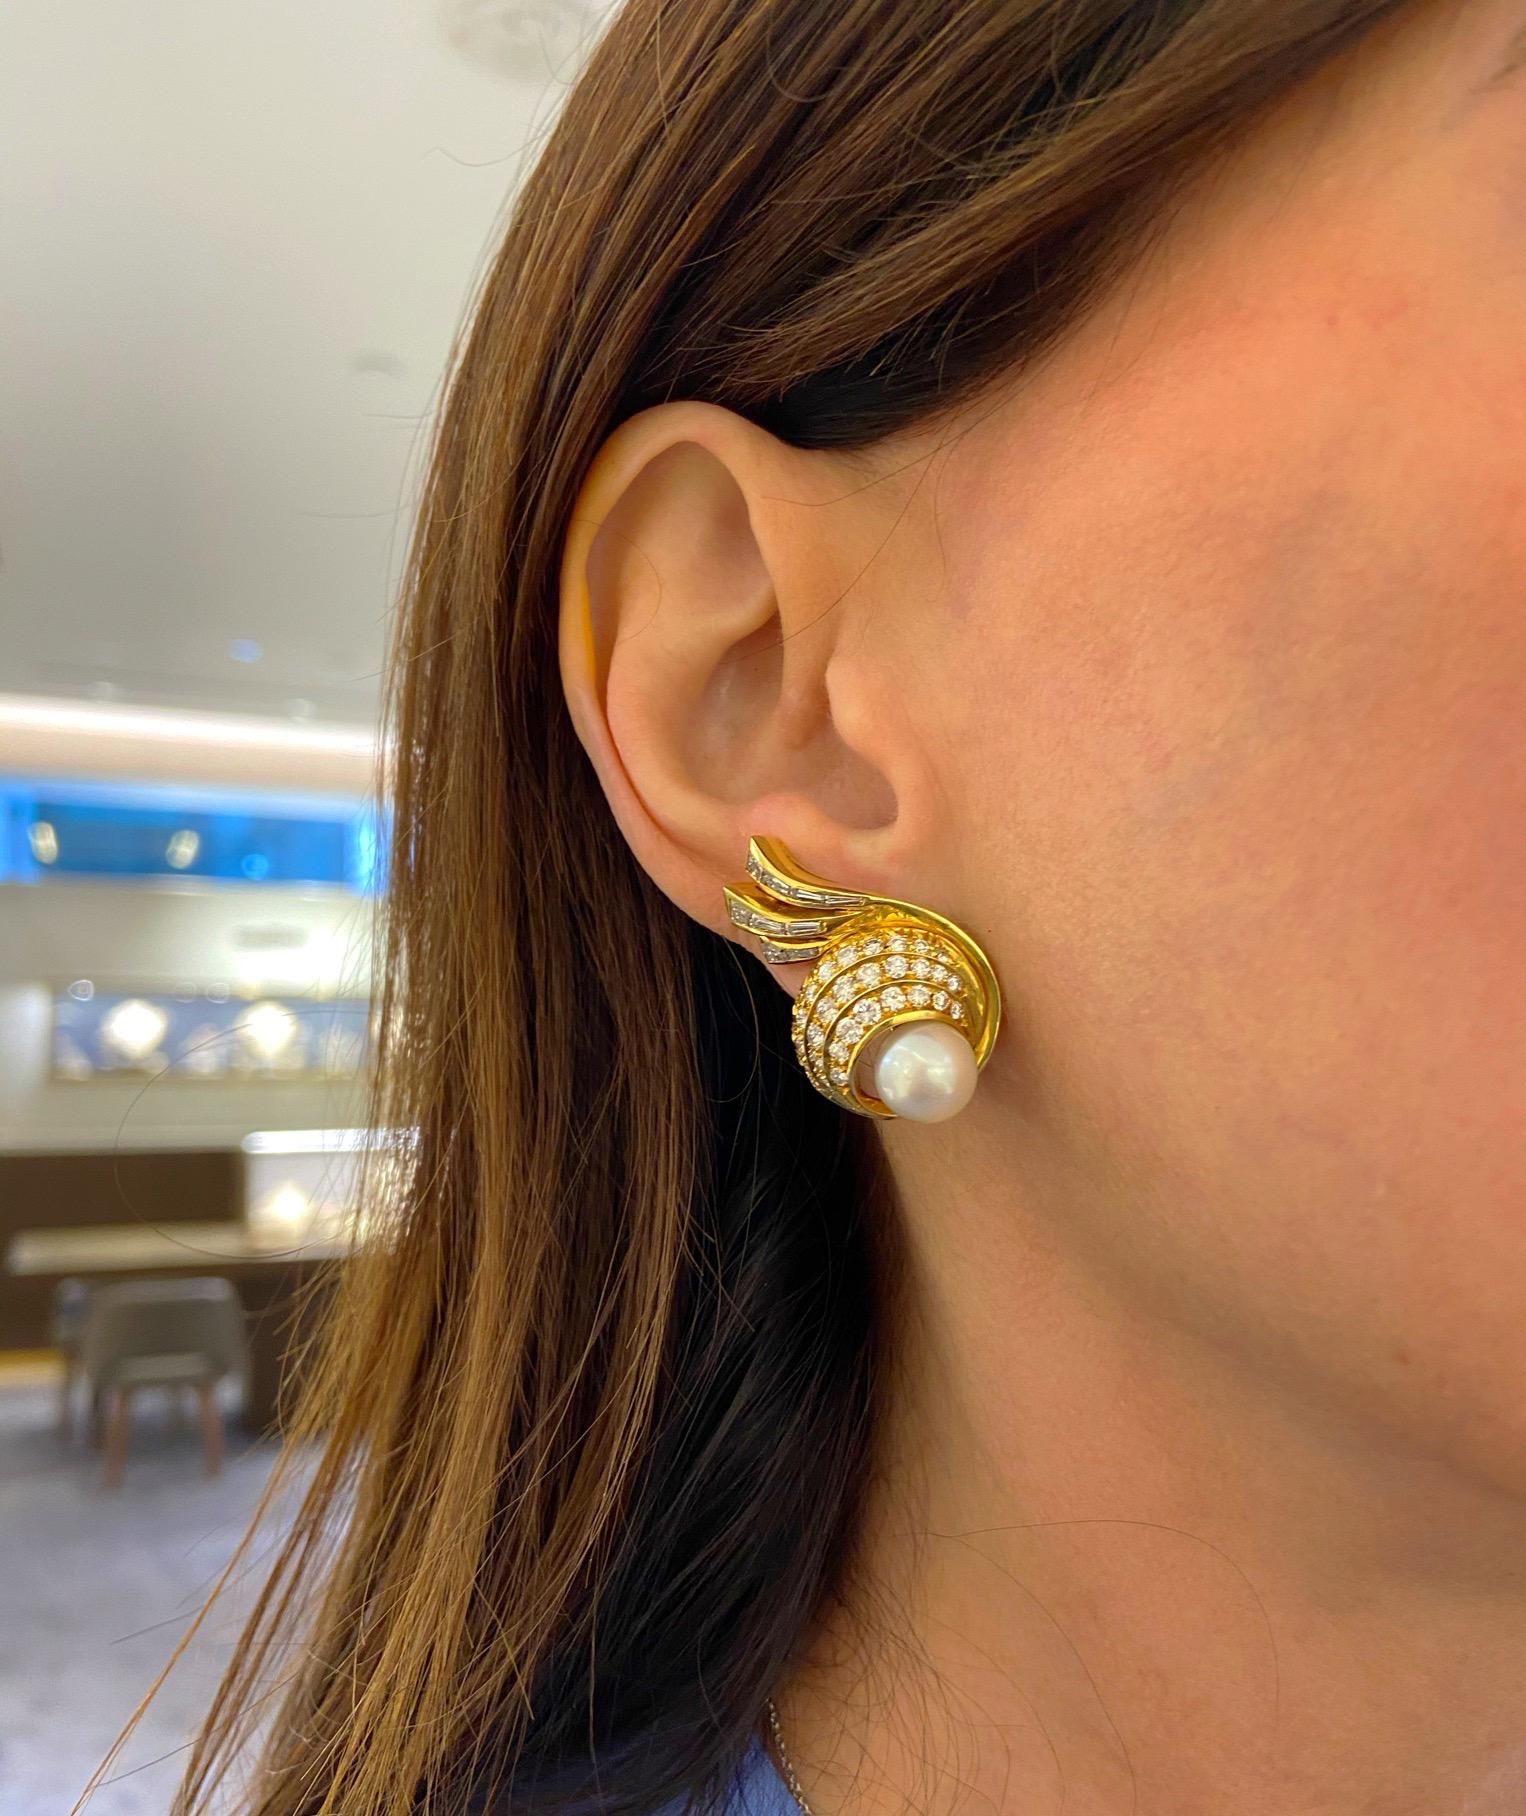 Elegant and classic is the best way to describe these 18 karat yellow gold earrings. The swirl design earrings are set with round brilliant and baguette cut diamonds, which give a nice contrast. The centers are set with 9mm cultured pearls.The